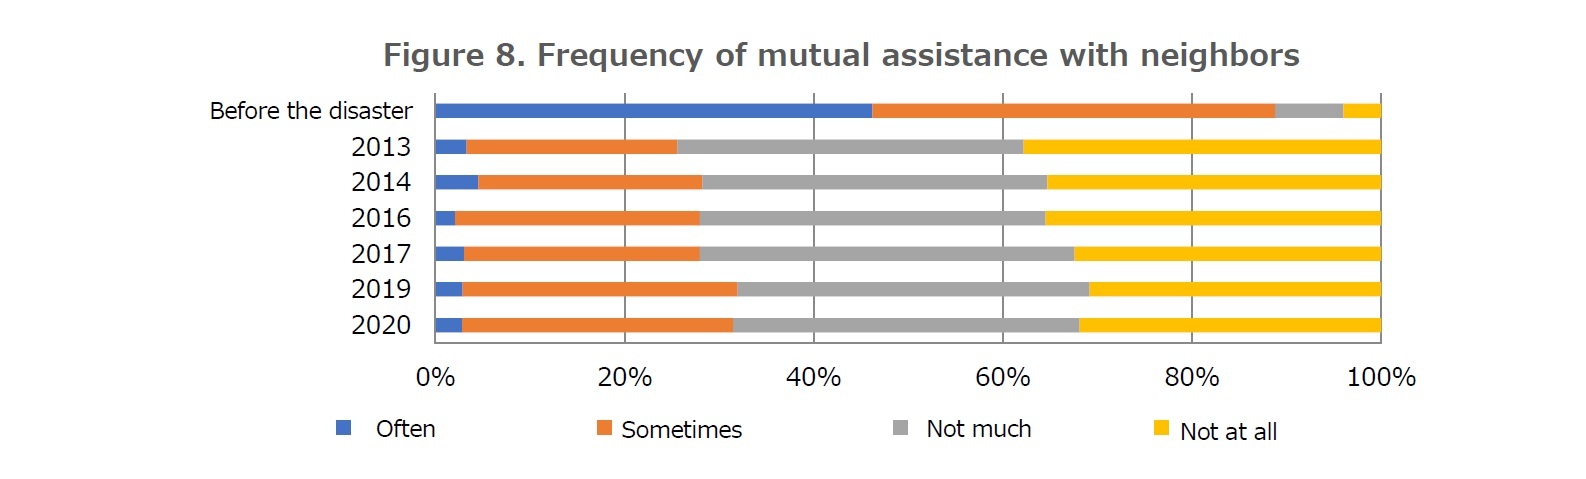 Figure 8. Frequency of mutual assistance with neighbors